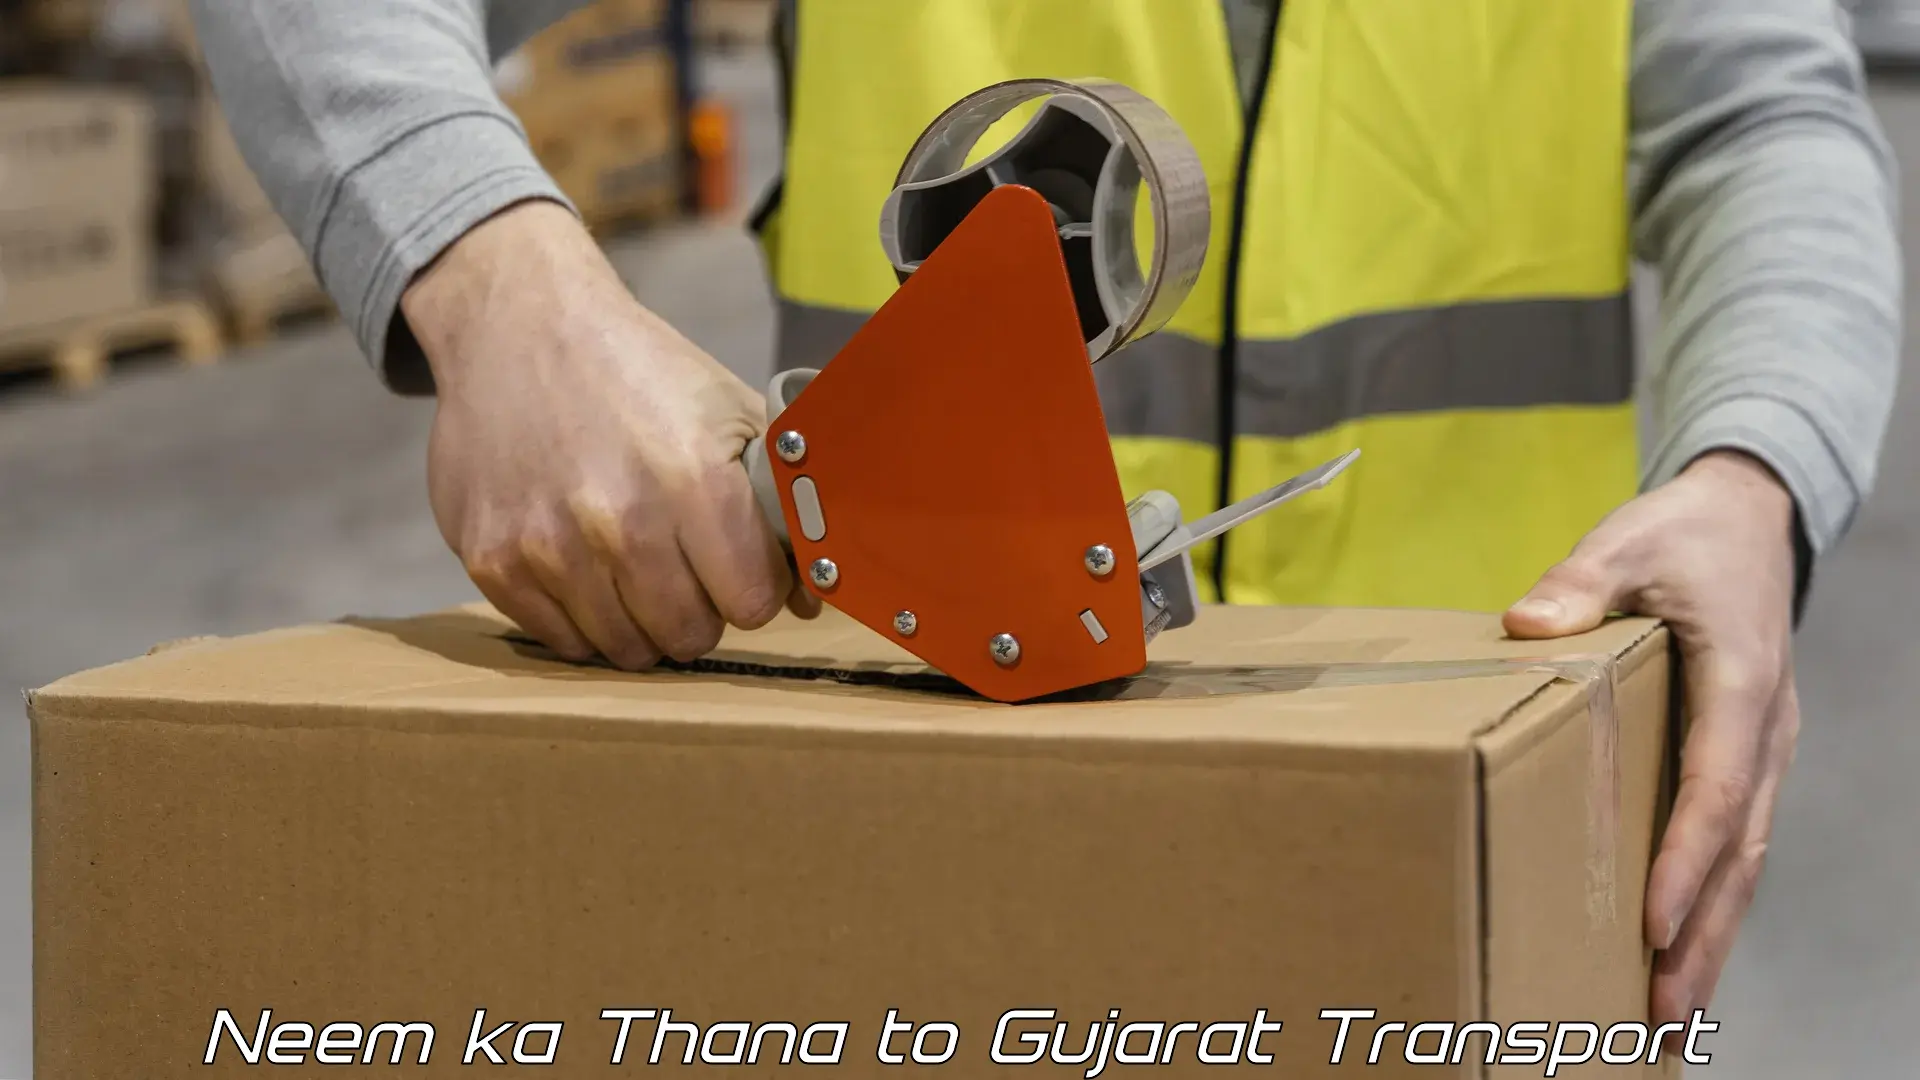 Transport bike from one state to another Neem ka Thana to Gujarat